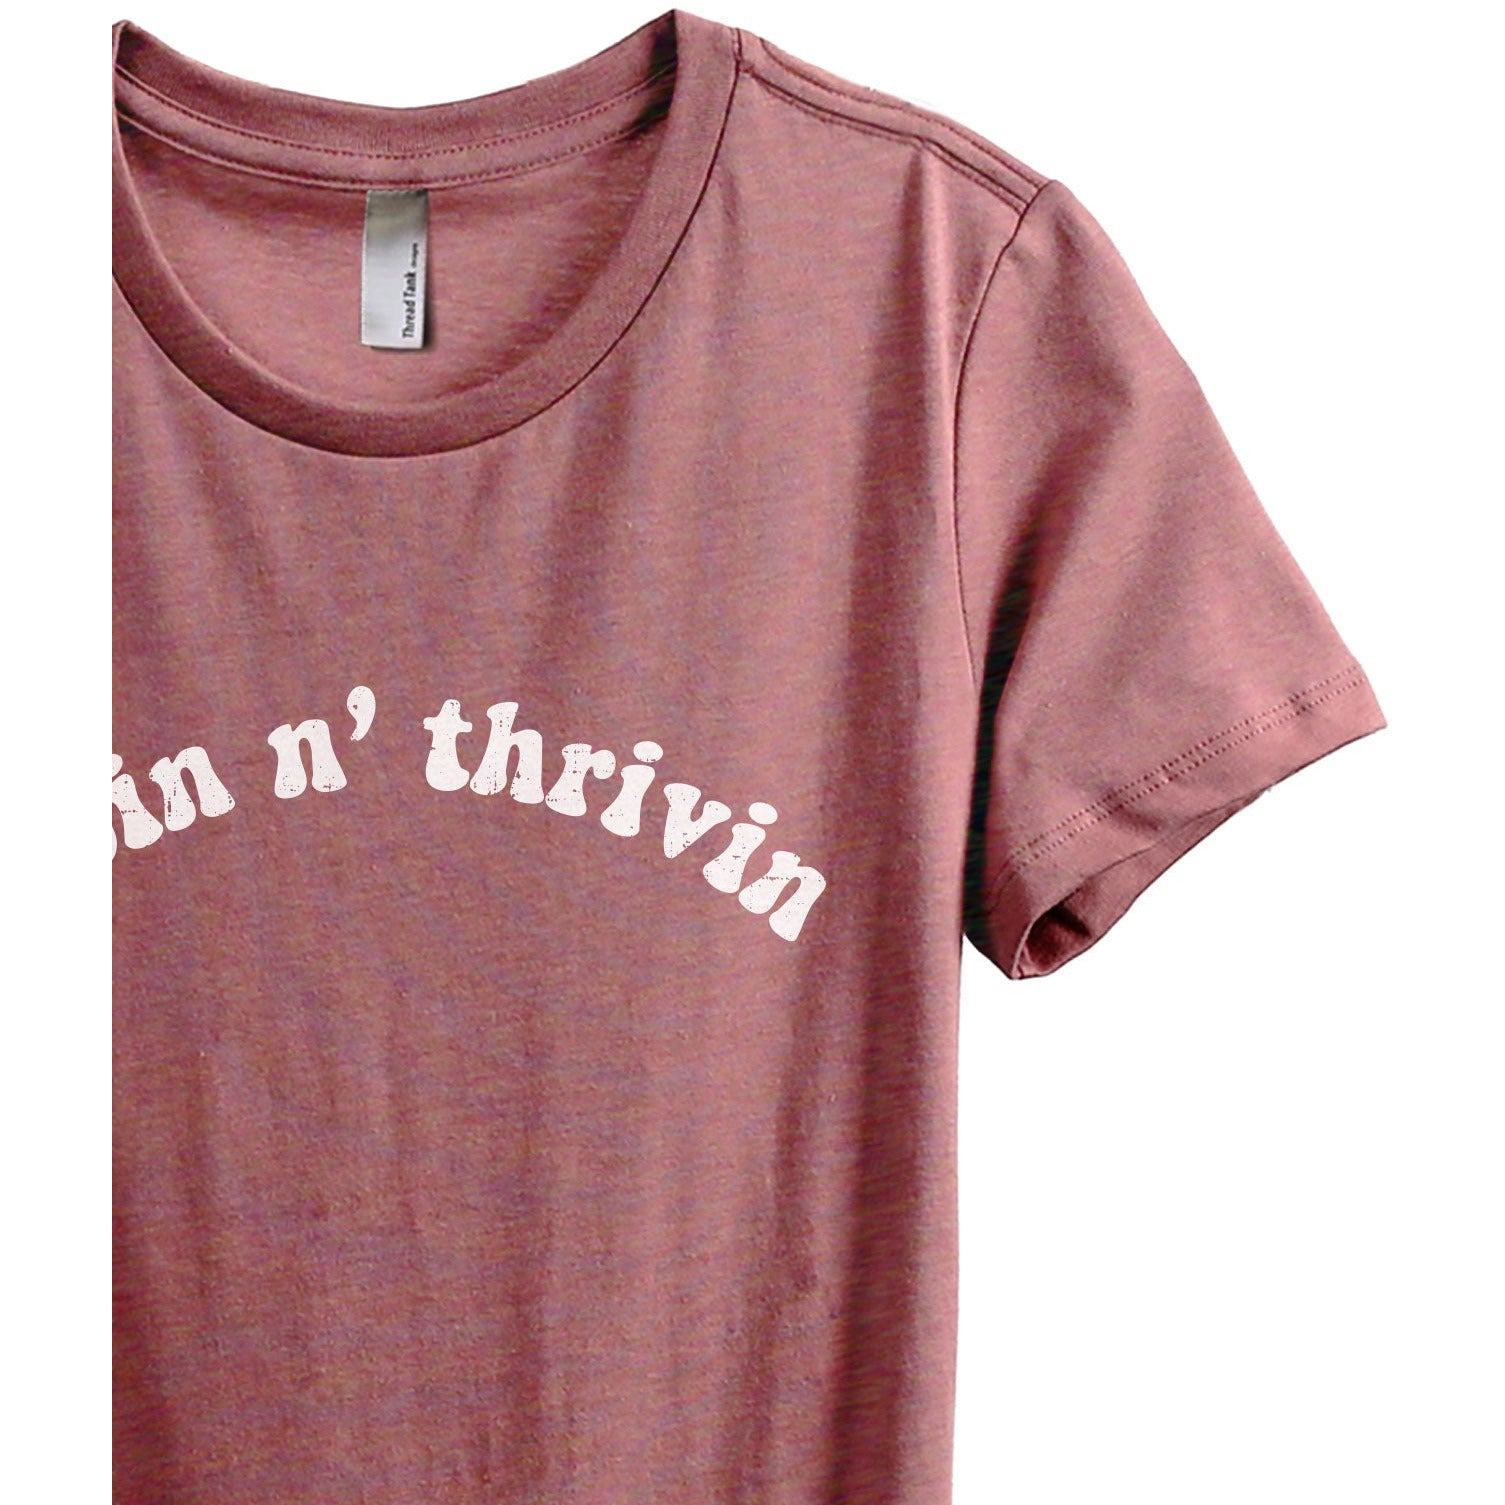 Vibin N' Thrivin - Stories You Can Wear